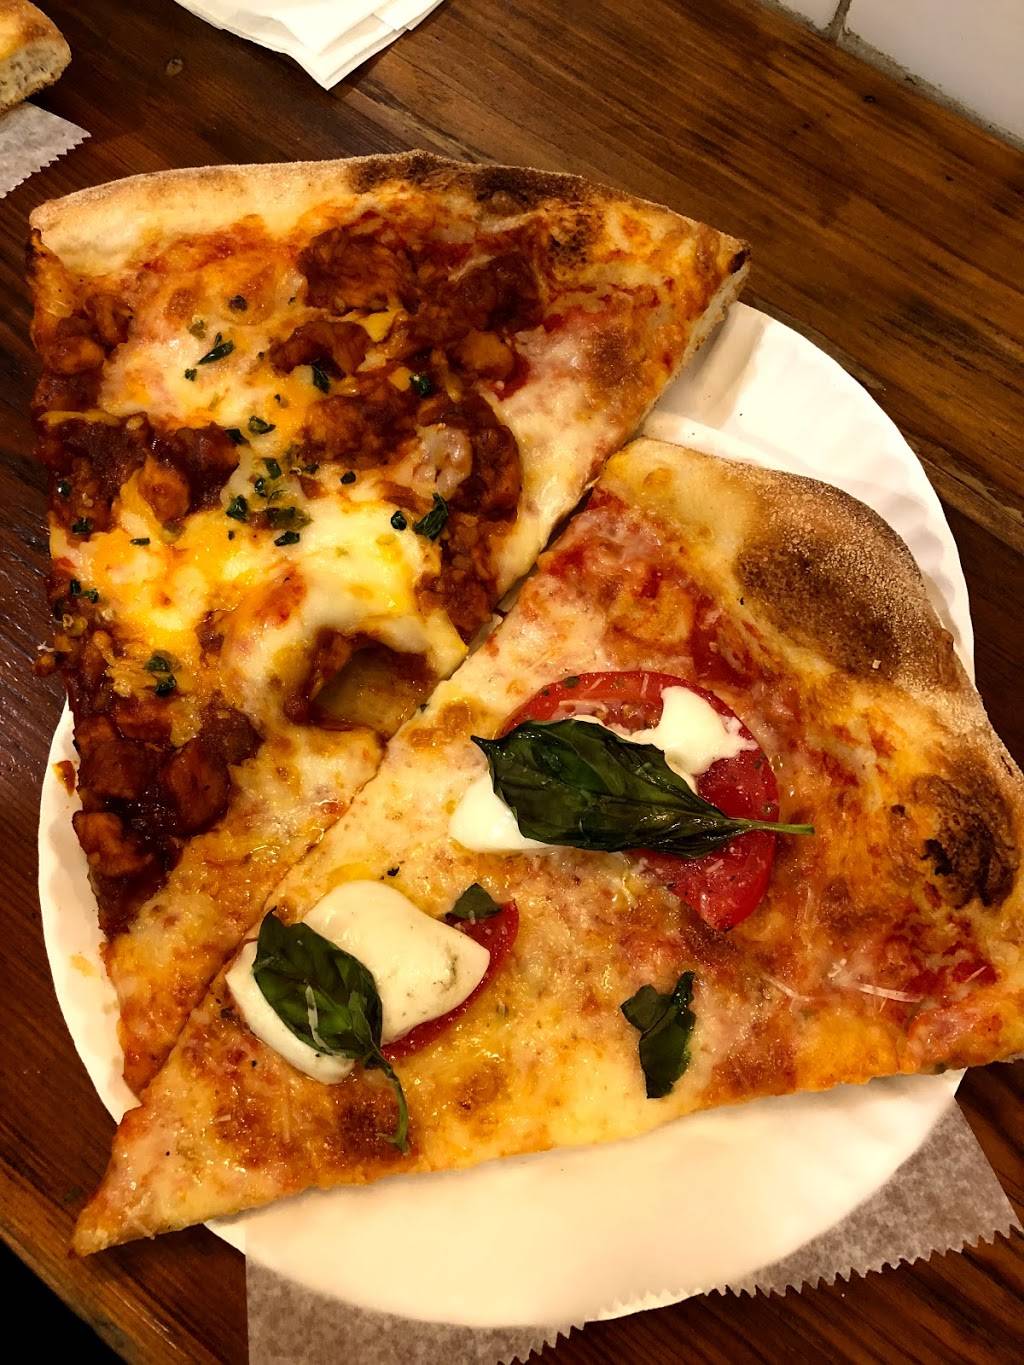 Joe & Sals Pizzeria | meal delivery | 842 Franklin Ave, Brooklyn, NY 11225, USA | 7184848732 OR +1 718-484-8732